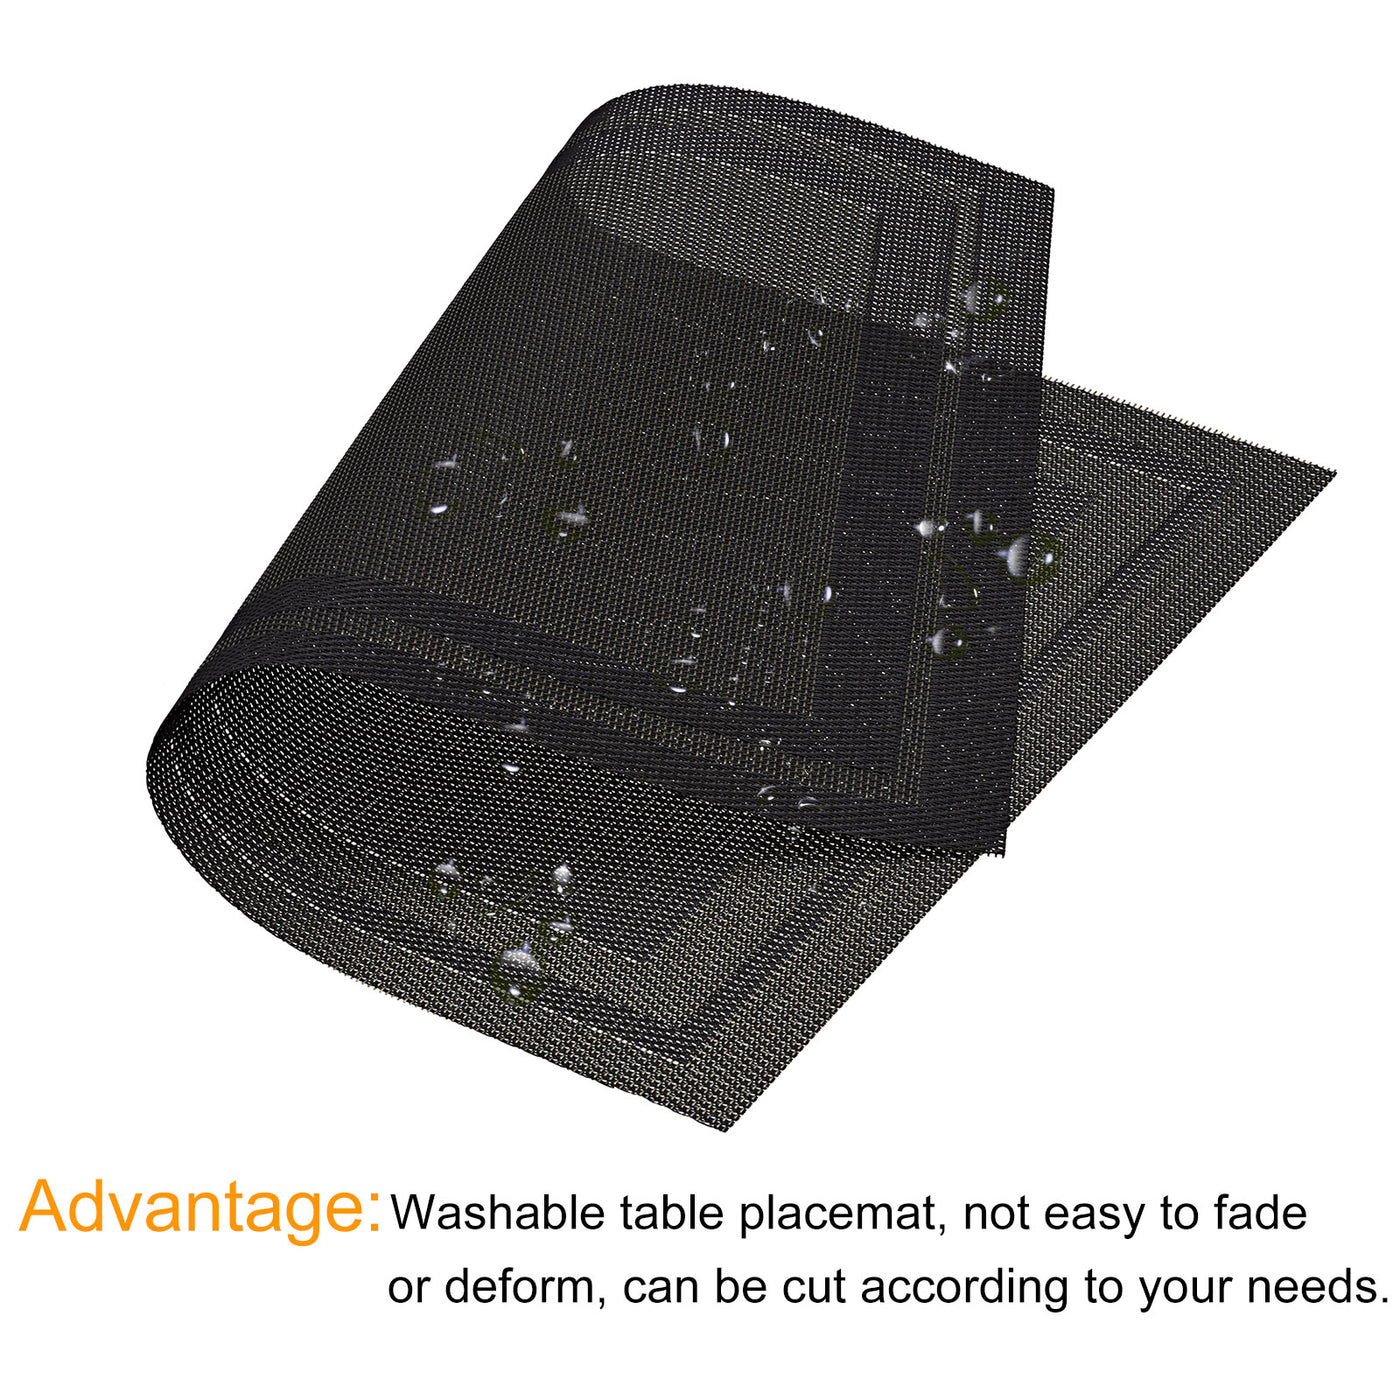 uxcell Uxcell Place Mats, 450x300mm Table Mats Set of 2 PVC Washable Woven Placemat Dark Gray